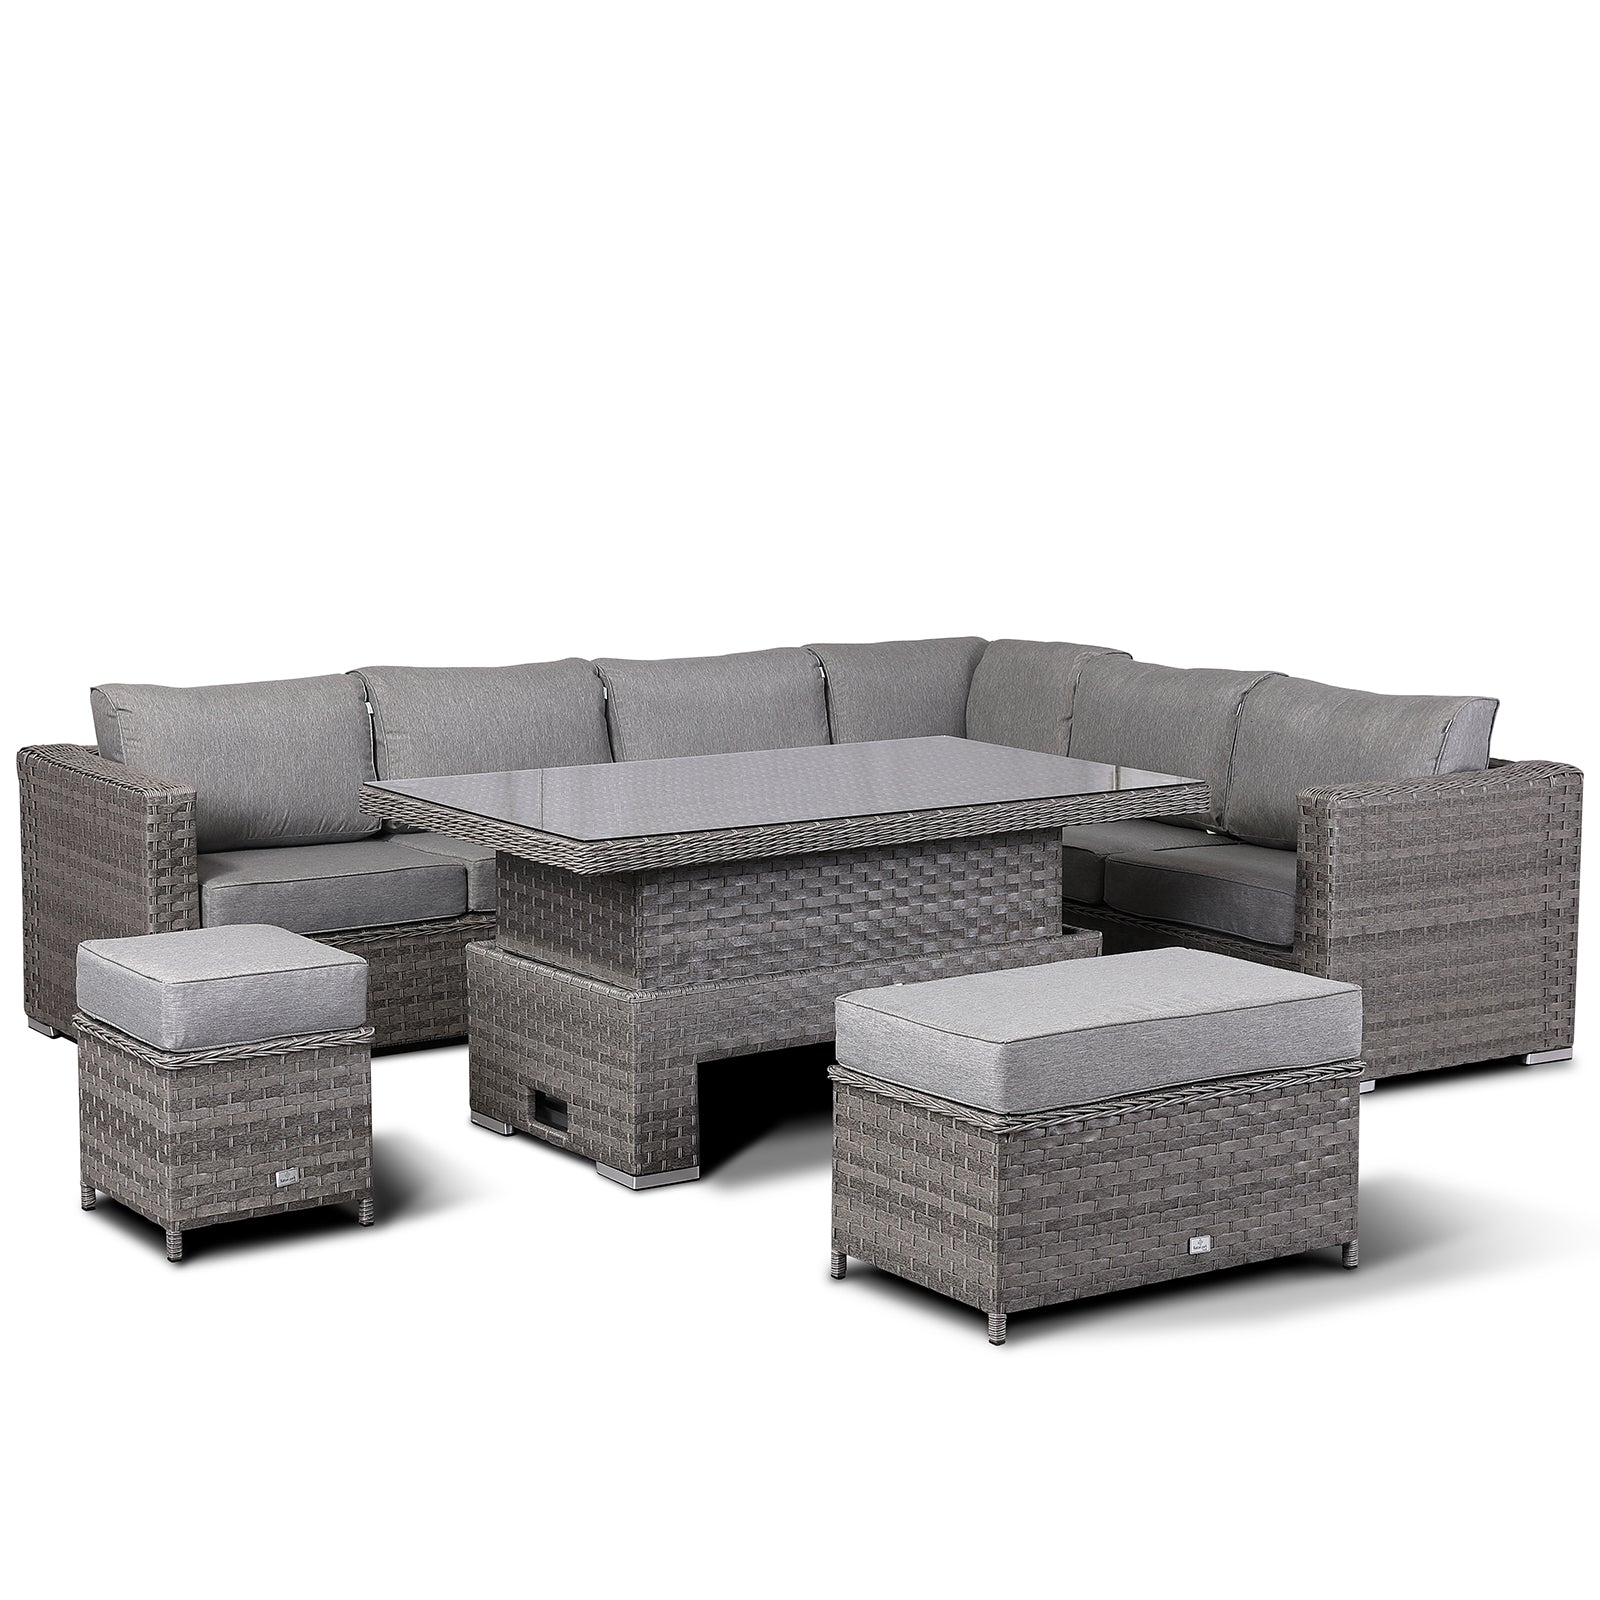 Ascot Modular Corner Set with Rising Table in Grey Weave and Grey Cushions